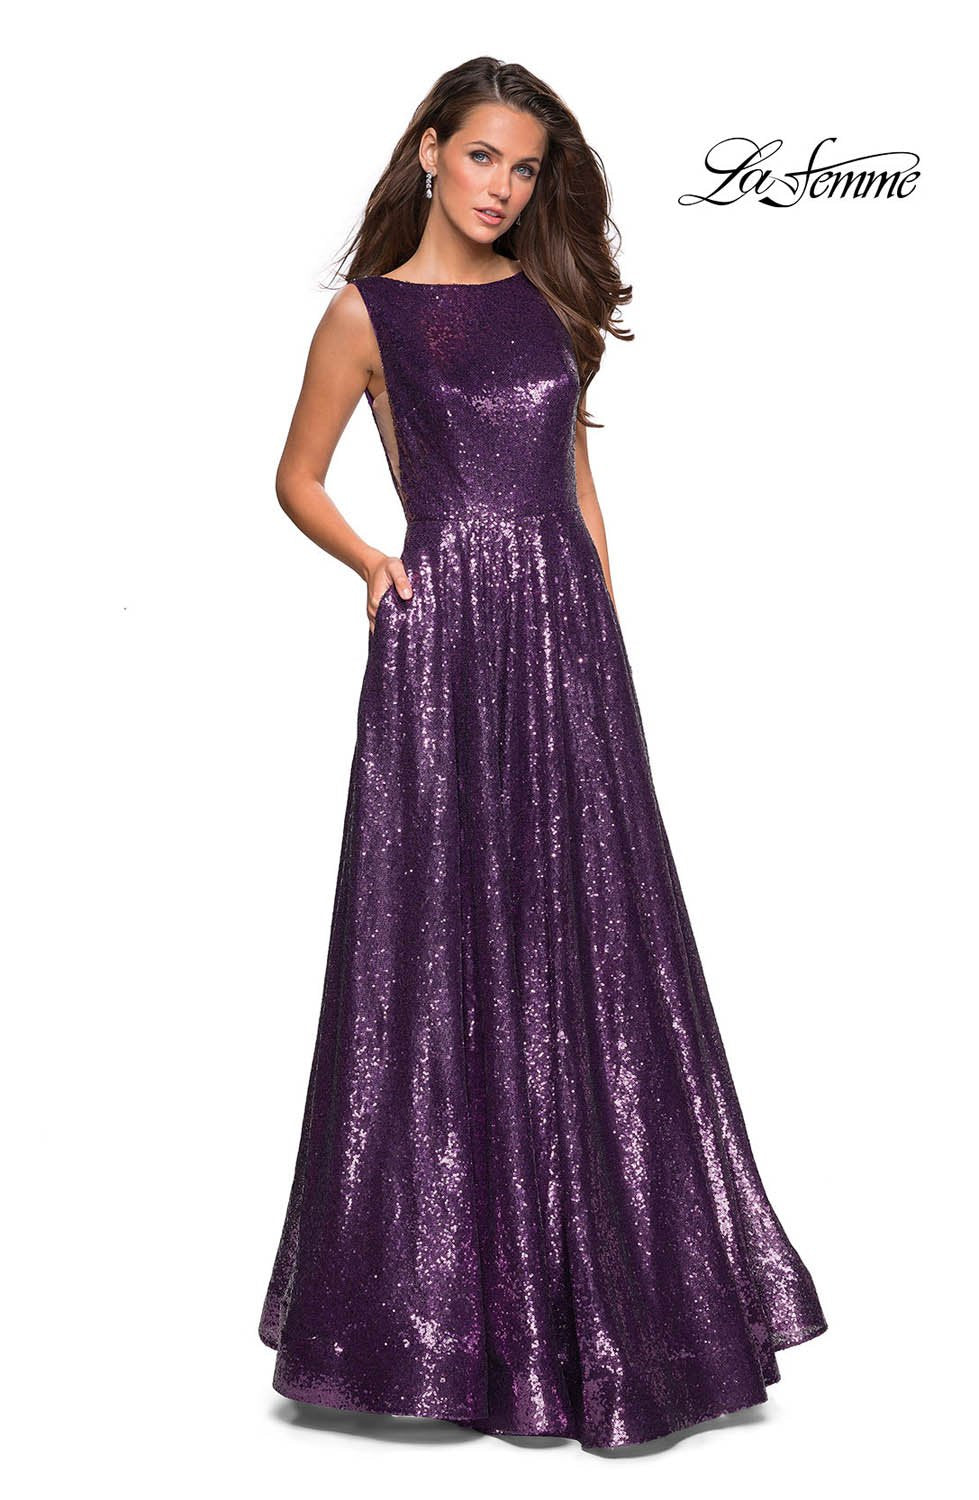 La Femme 27061 dress images in these colors: Light Purple, Navy, Rose Gold.